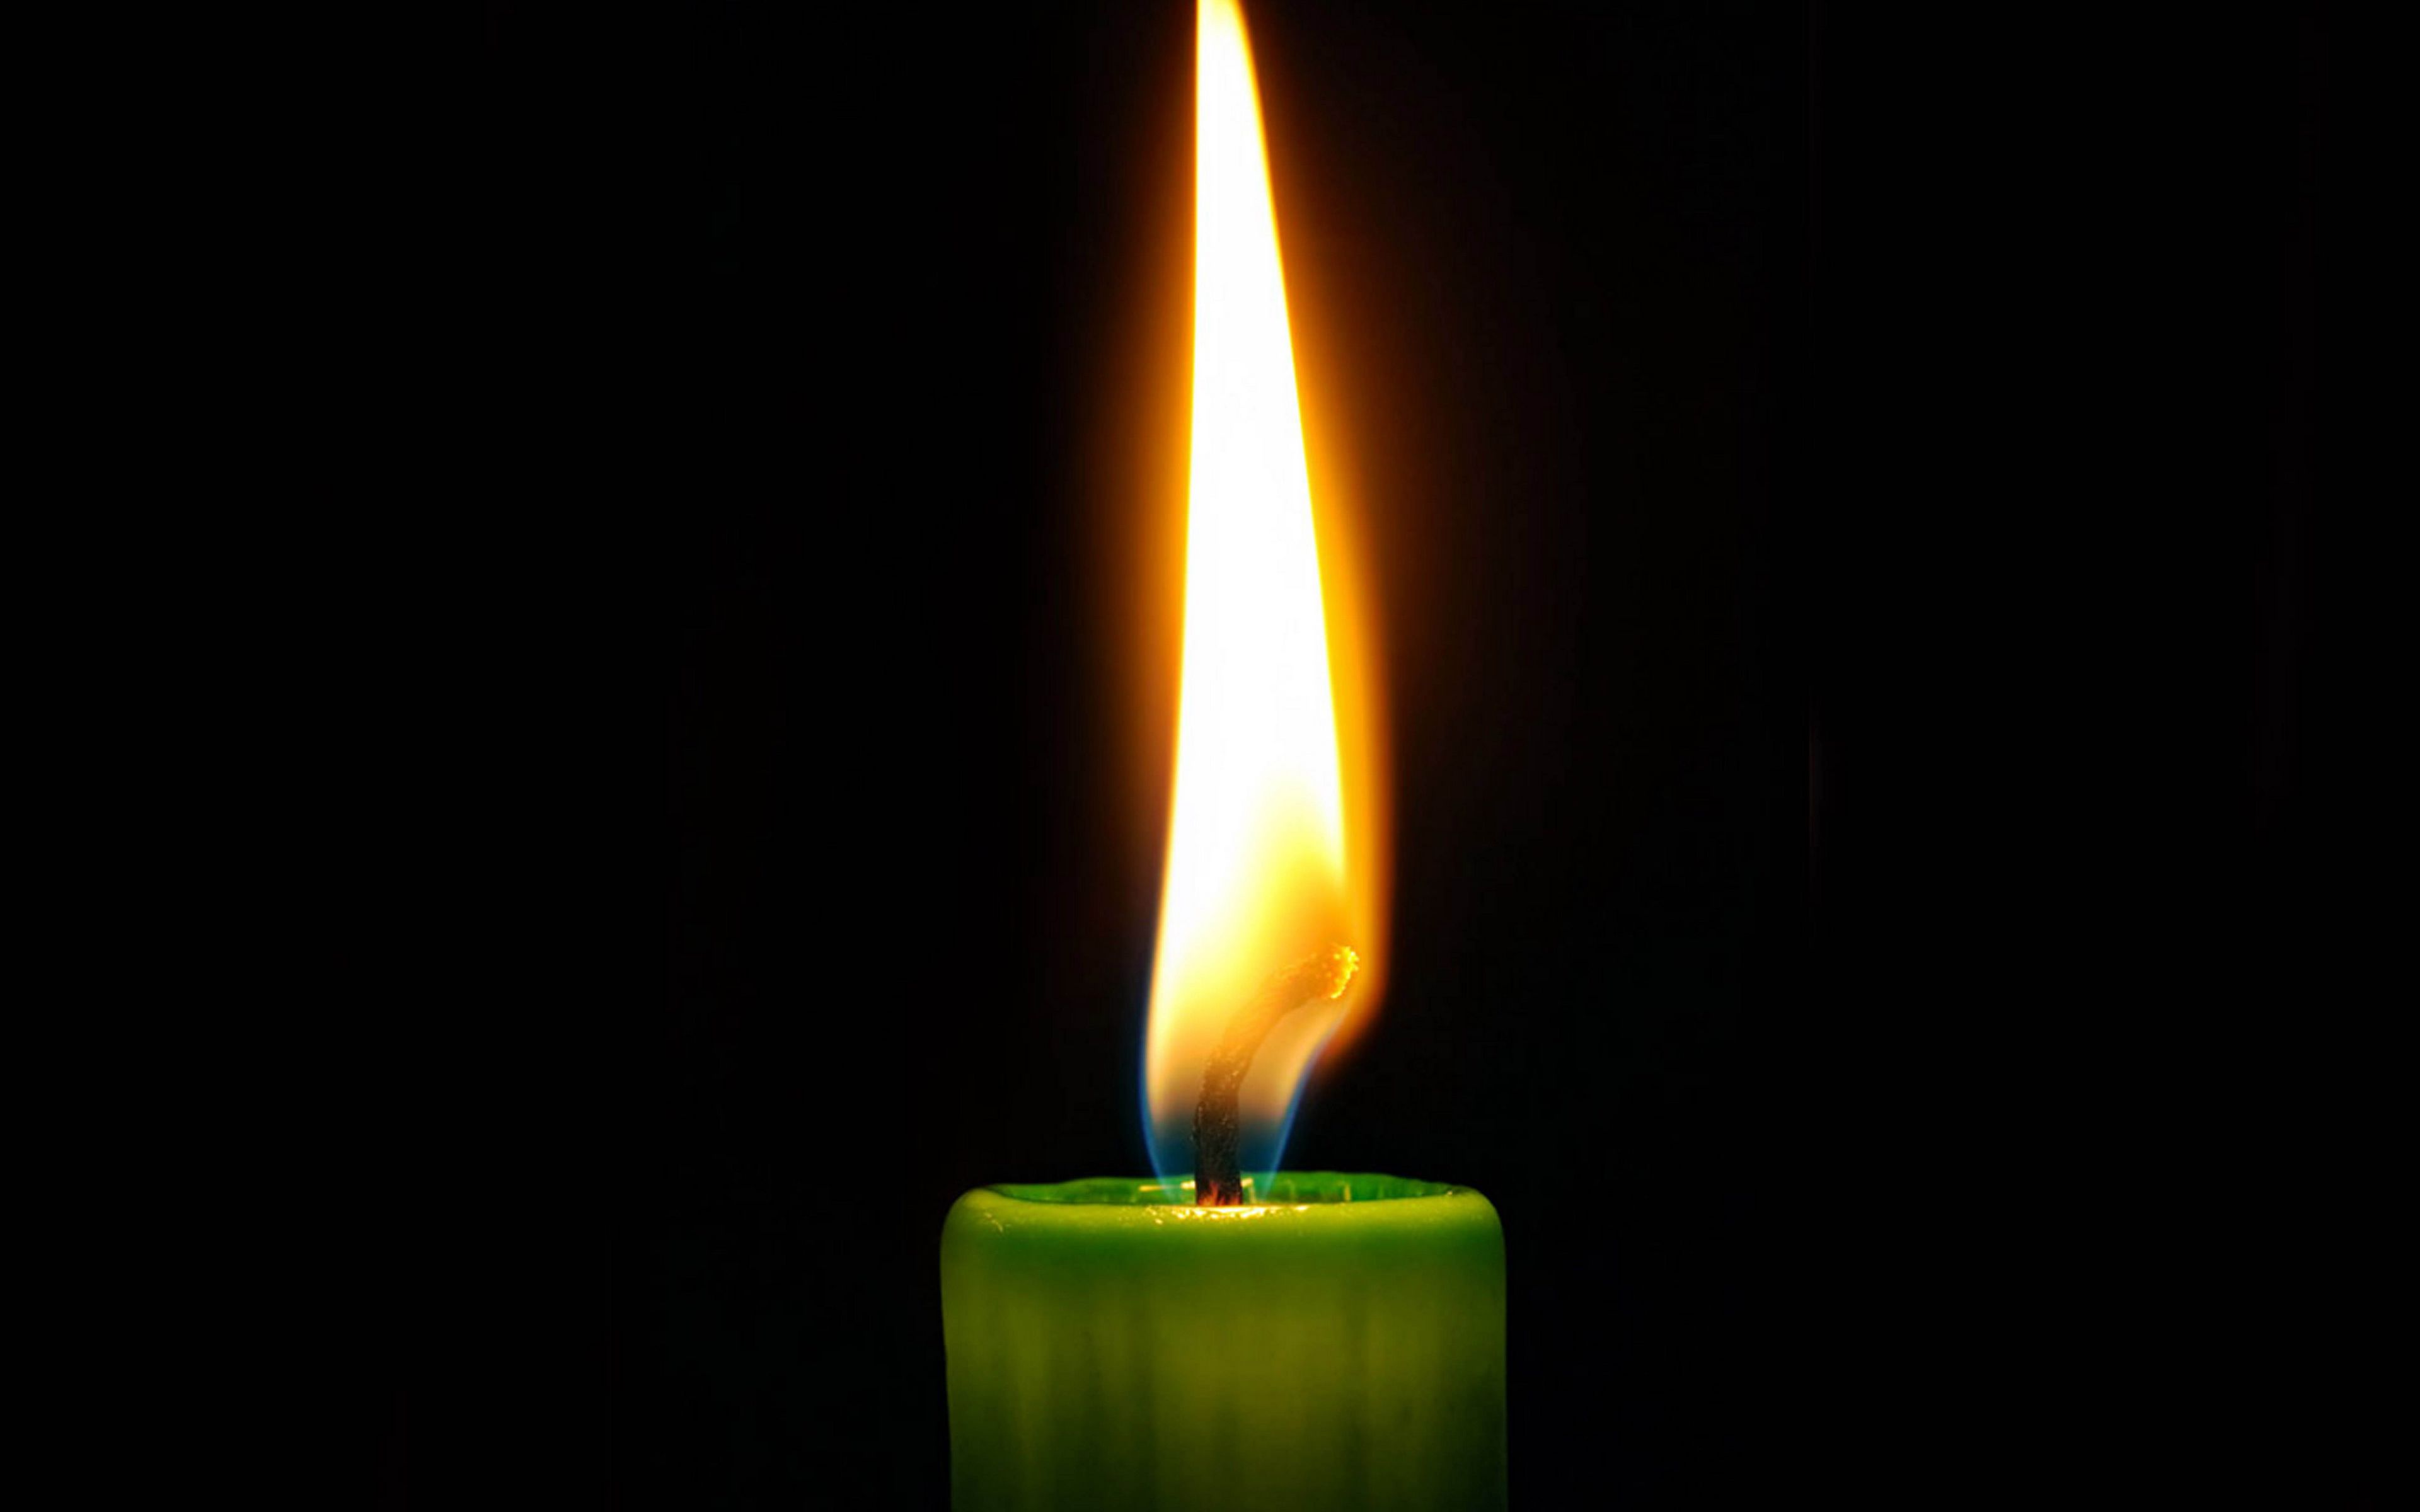 Download wallpaper 3840x2400 candle, fire, black background, wax, wick ...